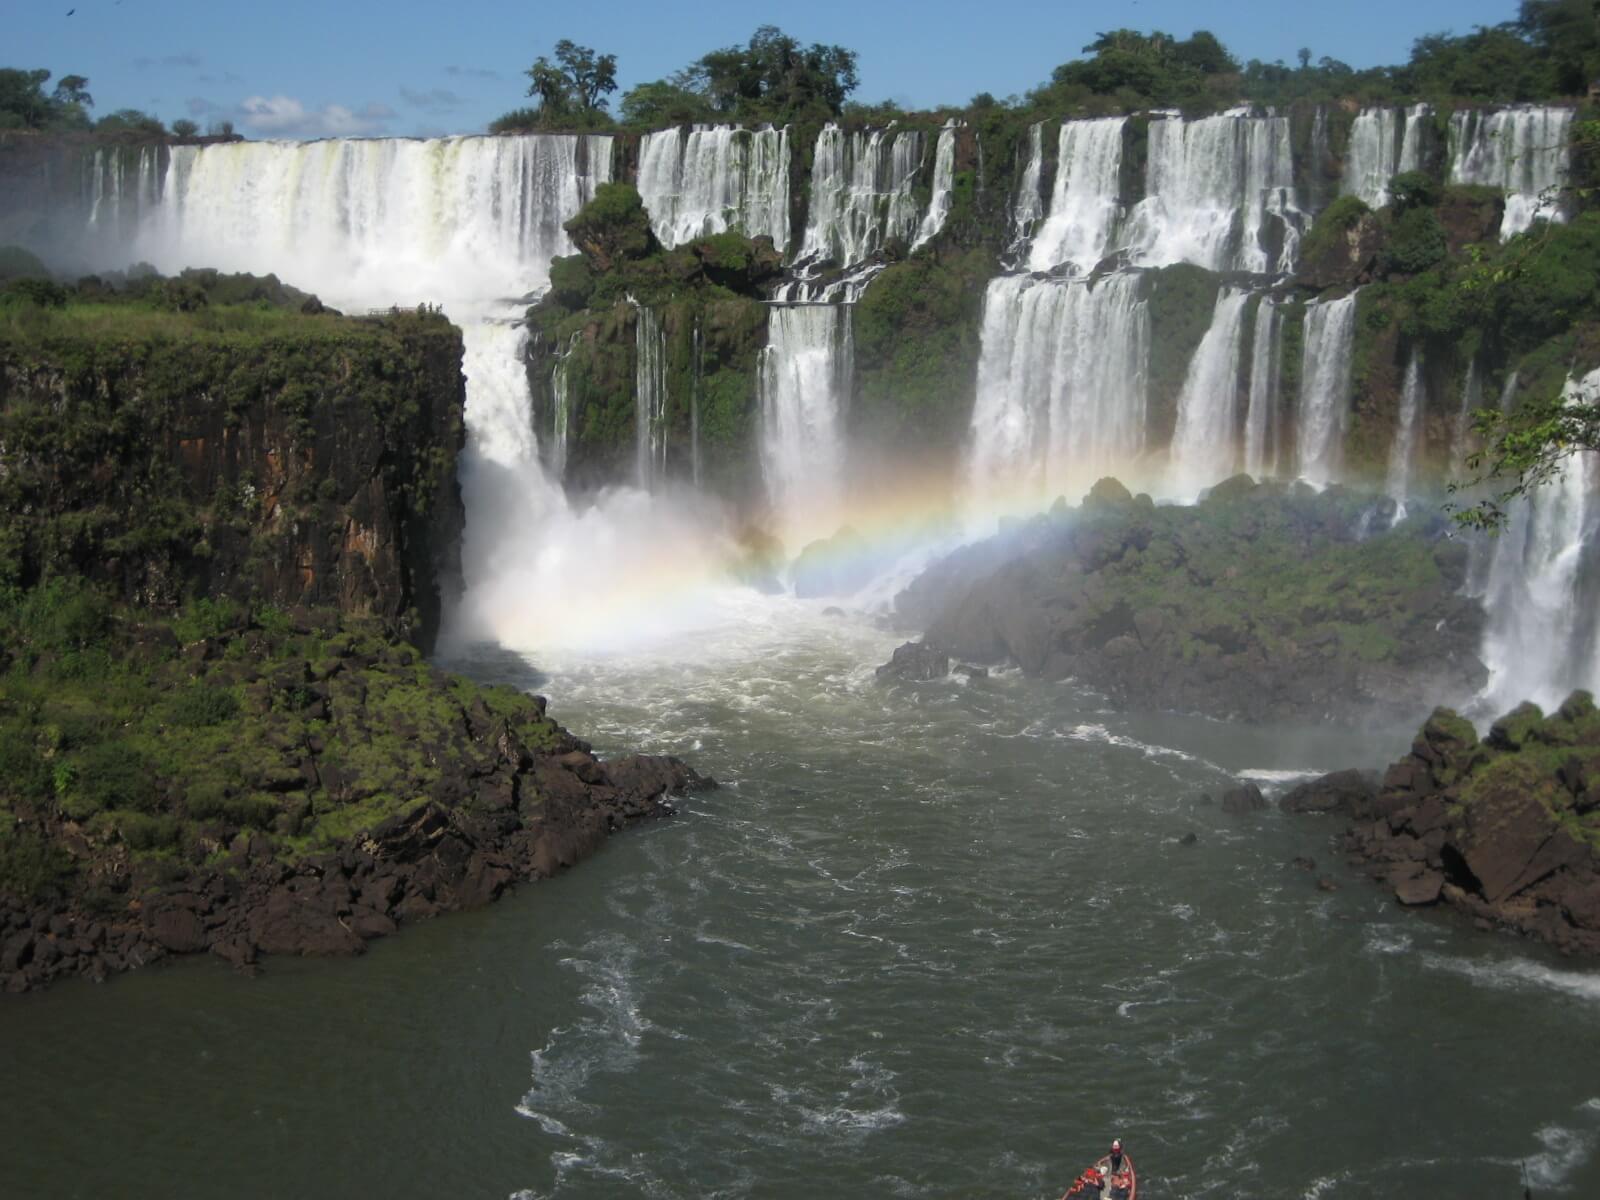 Iguazú Falls guided tour: From Buenos Aires to the Devil's Throat